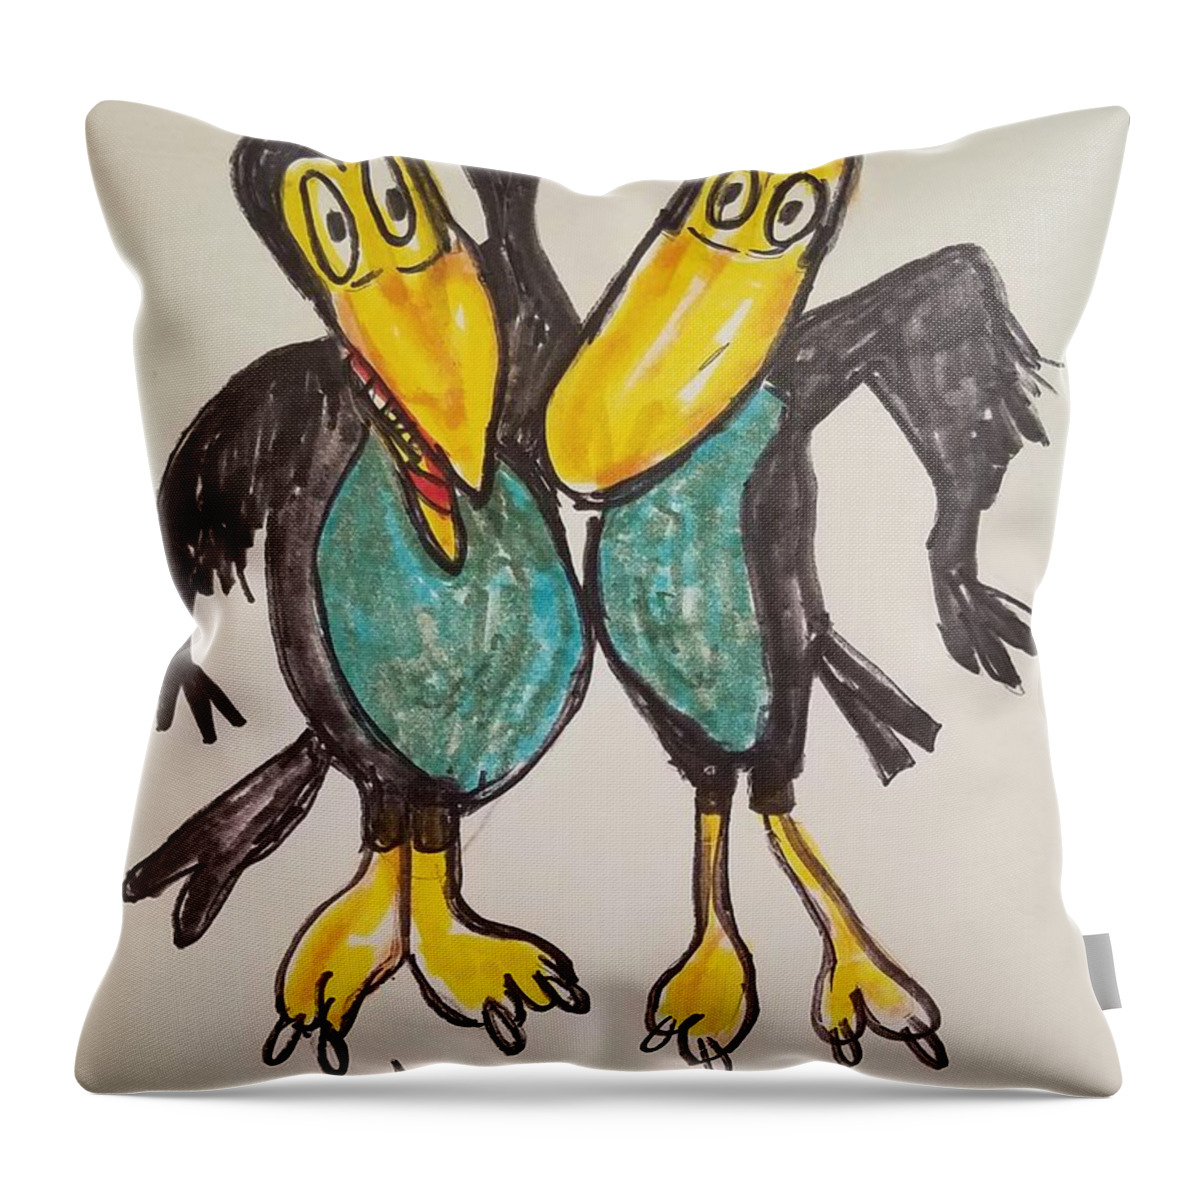 Heckle And Jeckle Throw Pillow featuring the painting Heckle And Jeckle by Geraldine Myszenski